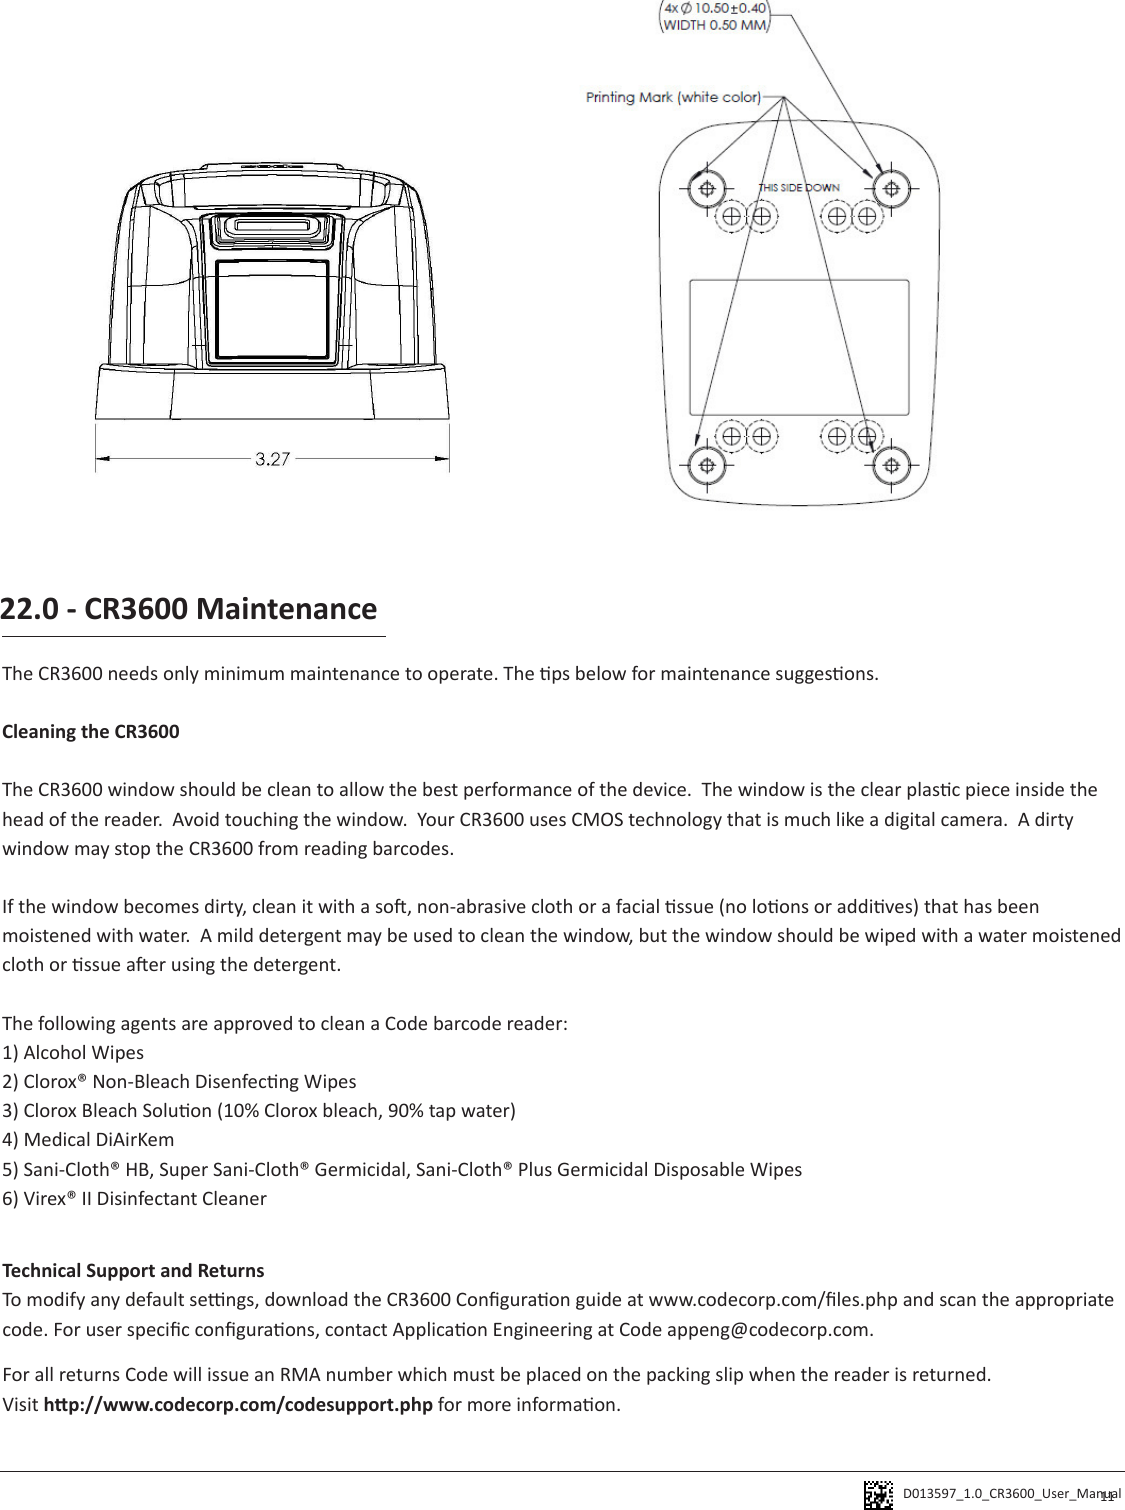 D013597_1.0_CR3600_User_Manual 11The CR3600 needs only minimum maintenance to operate. The ps below for maintenance suggesons.Cleaning the CR3600 The CR3600 window should be clean to allow the best performance of the device.  The window is the clear plasc piece inside the head of the reader.  Avoid touching the window.  Your CR3600 uses CMOS technology that is much like a digital camera.  A dirty window may stop the CR3600 from reading barcodes.  If the window becomes dirty, clean it with a so, non-abrasive cloth or a facial ssue (no loons or addives) that has been moistened with water.  A mild detergent may be used to clean the window, but the window should be wiped with a water moistened cloth or ssue aer using the detergent.The following agents are approved to clean a Code barcode reader:1) Alcohol Wipes2) Clorox® Non-Bleach Disenfecng Wipes3) Clorox Bleach Soluon (10% Clorox bleach, 90% tap water)4) Medical DiAirKem5) Sani-Cloth® HB, Super Sani-Cloth® Germicidal, Sani-Cloth® Plus Germicidal Disposable Wipes6) Virex® II Disinfectant Cleaner22.0 - CR3600 MaintenanceTechnical Support and ReturnsTo modify any default sengs, download the CR3600 Conguraon guide at www.codecorp.com/les.php and scan the appropriate code. For user specic conguraons, contact Applicaon Engineering at Code appeng@codecorp.com.For all returns Code will issue an RMA number which must be placed on the packing slip when the reader is returned.  Visit hp://www.codecorp.com/codesupport.php for more informaon.